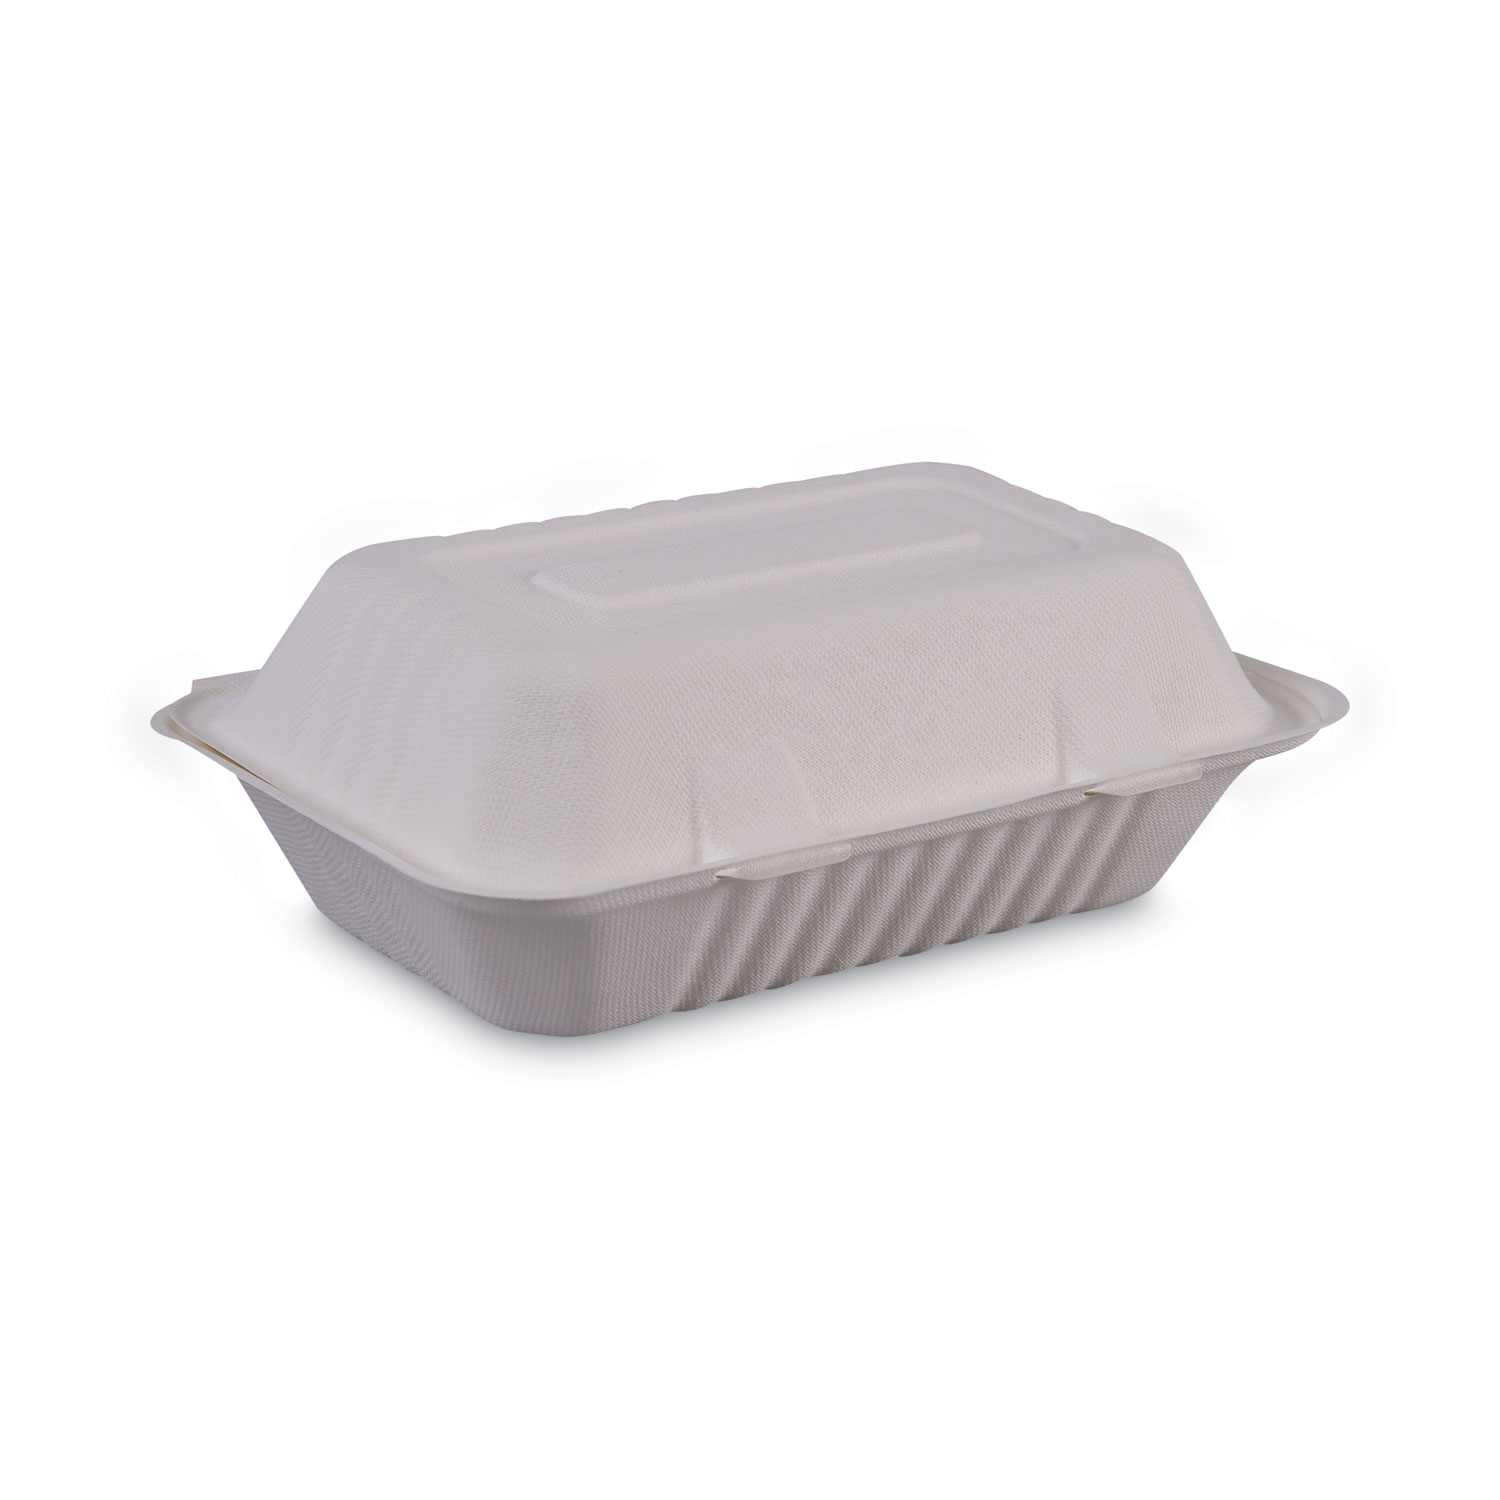 9 x 9 x 3.19 Large 3 Section Molded Fiber Hinged Lid Containers